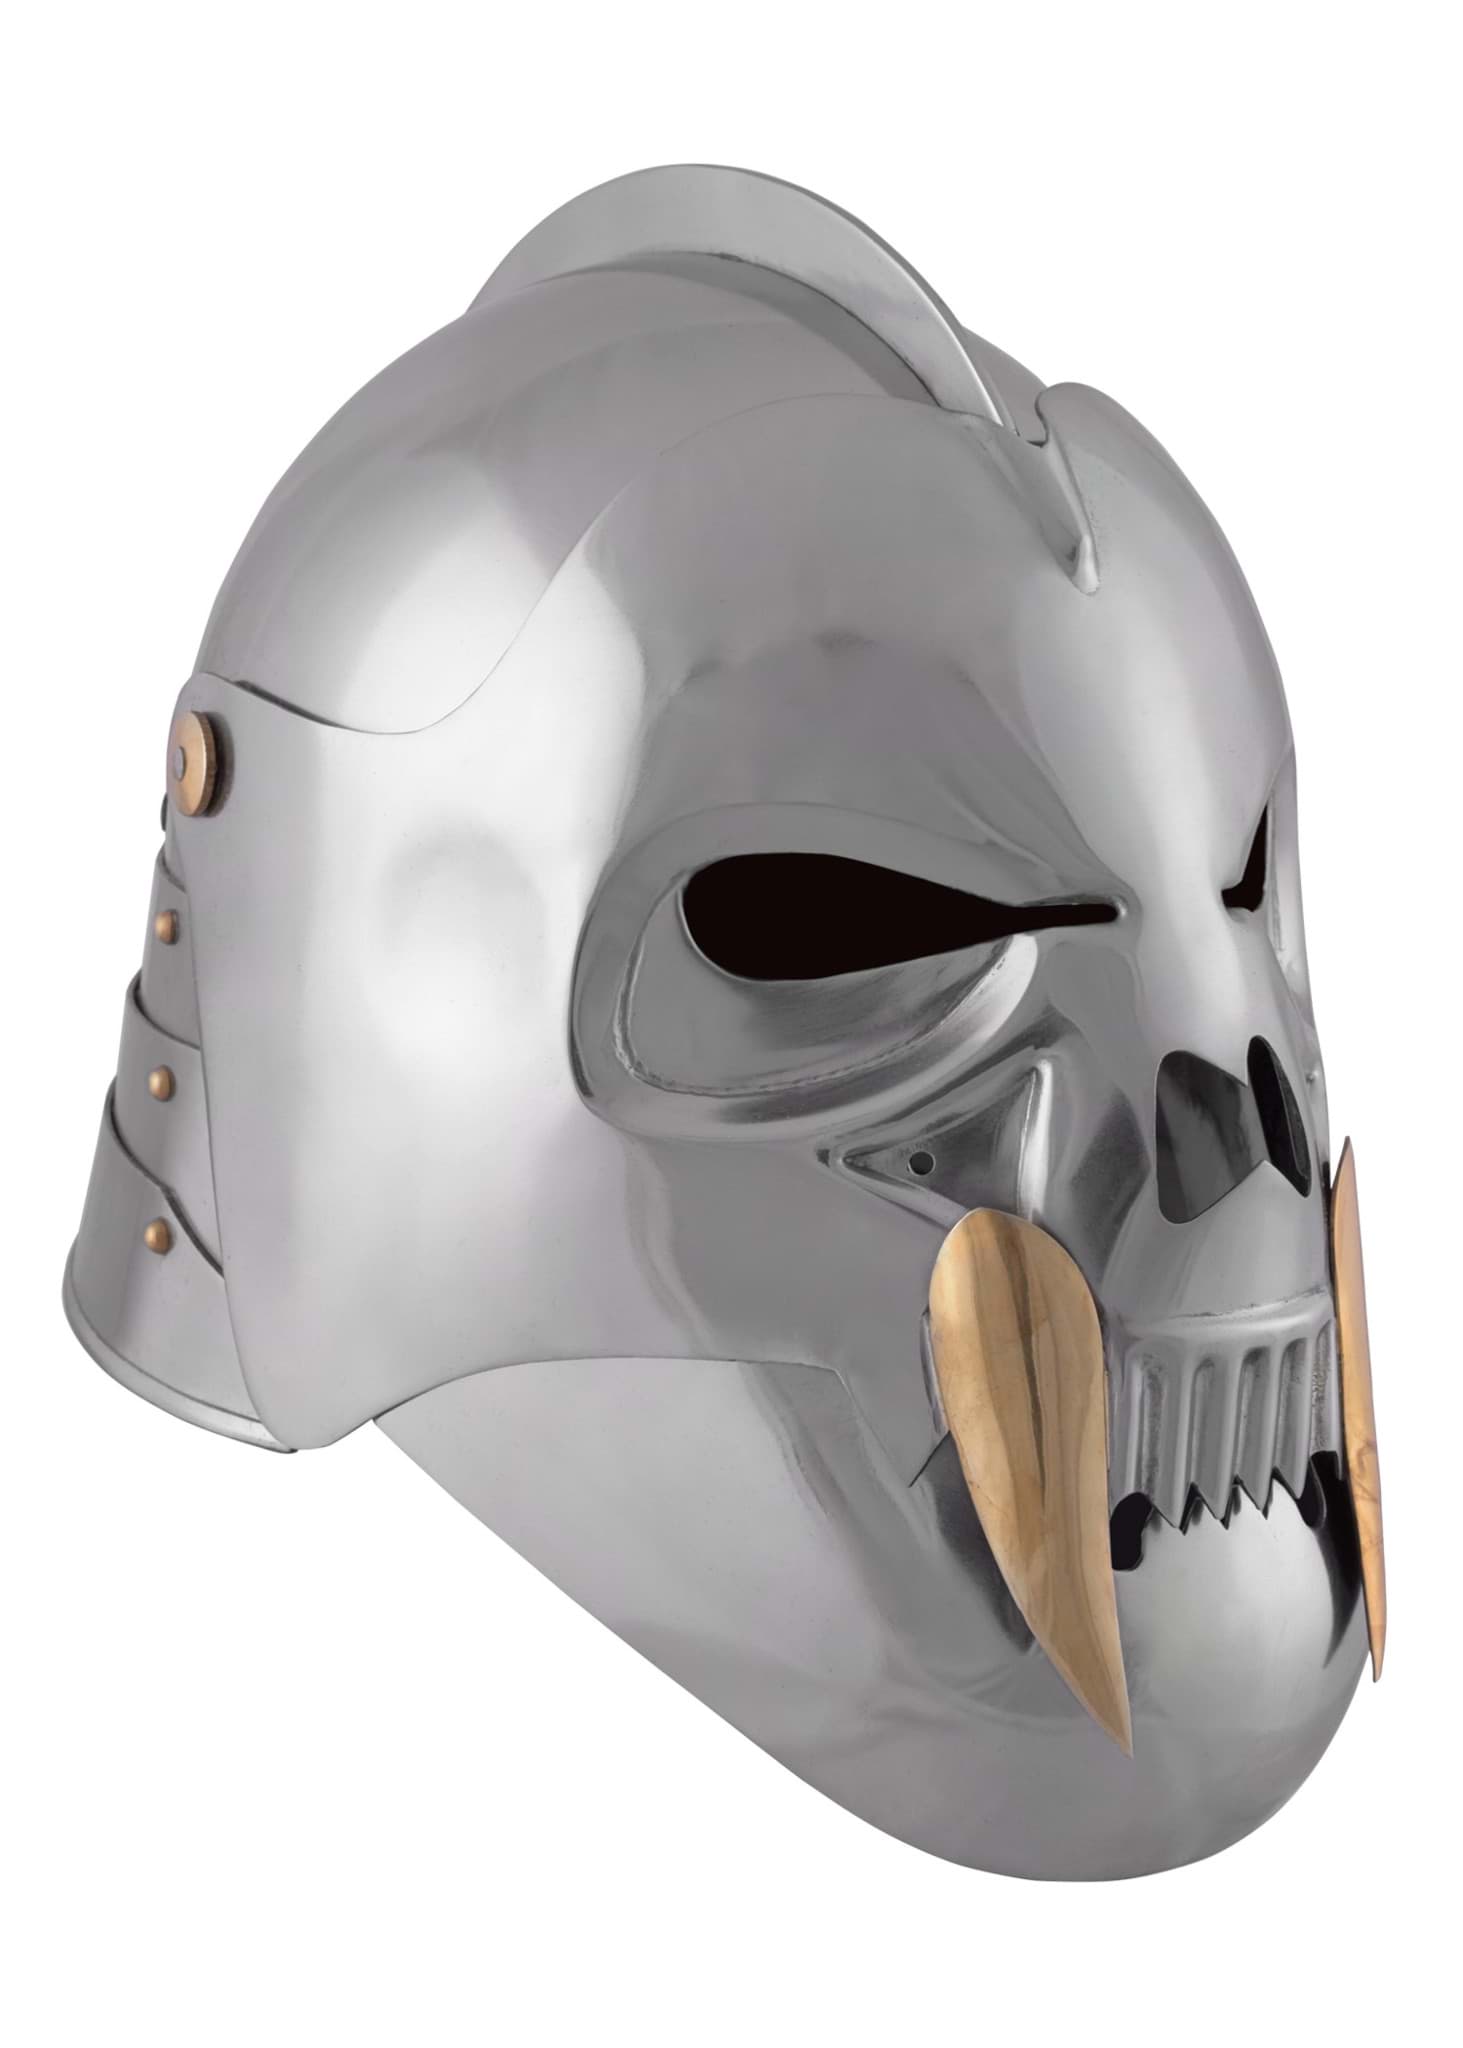 Picture of Battle Merchant - Orc Mask Helmet made of Steel